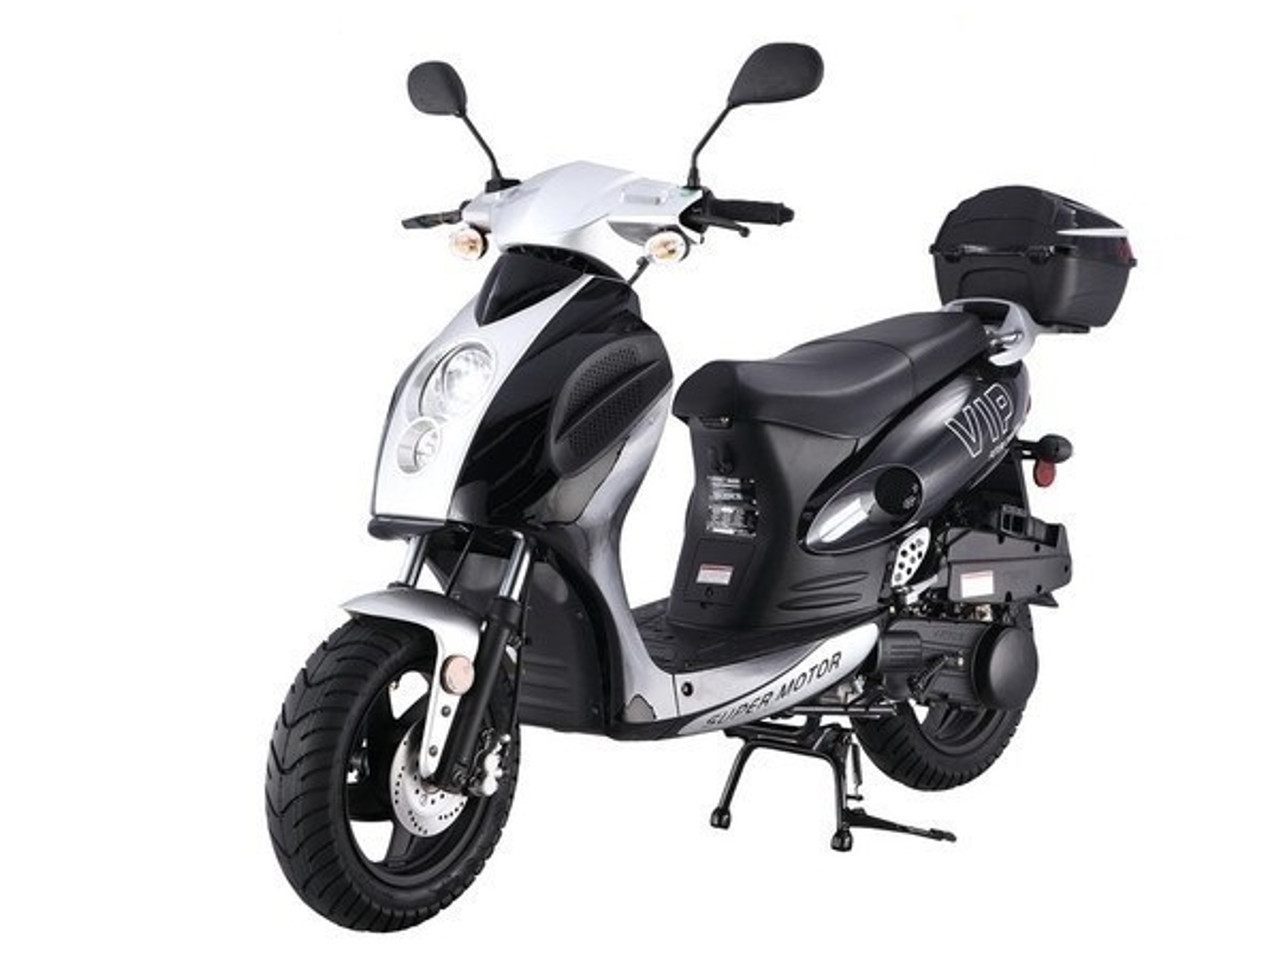 Taotao 150cc Pilot Moped Gas Scooter Electric Start, Kick Start Back Up CA Legal - Fully Assembled and Tested